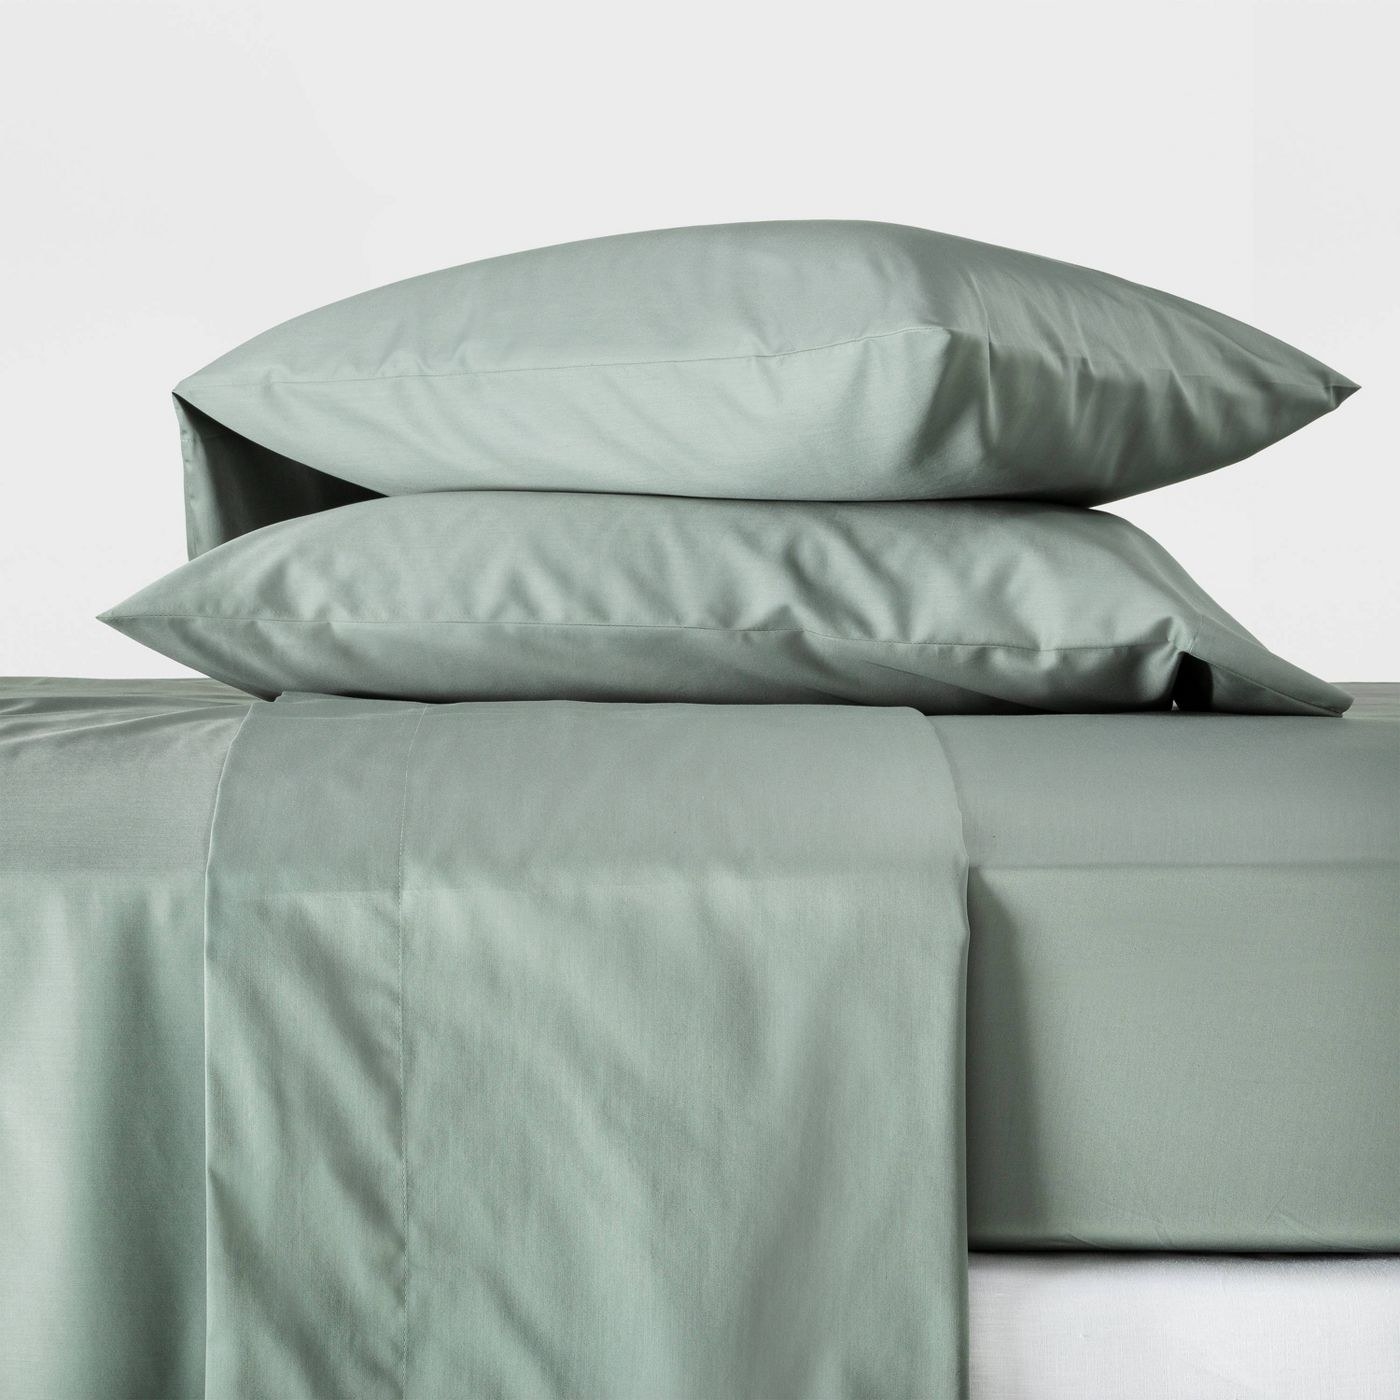 The sheets spread out over a bed in a soft green color